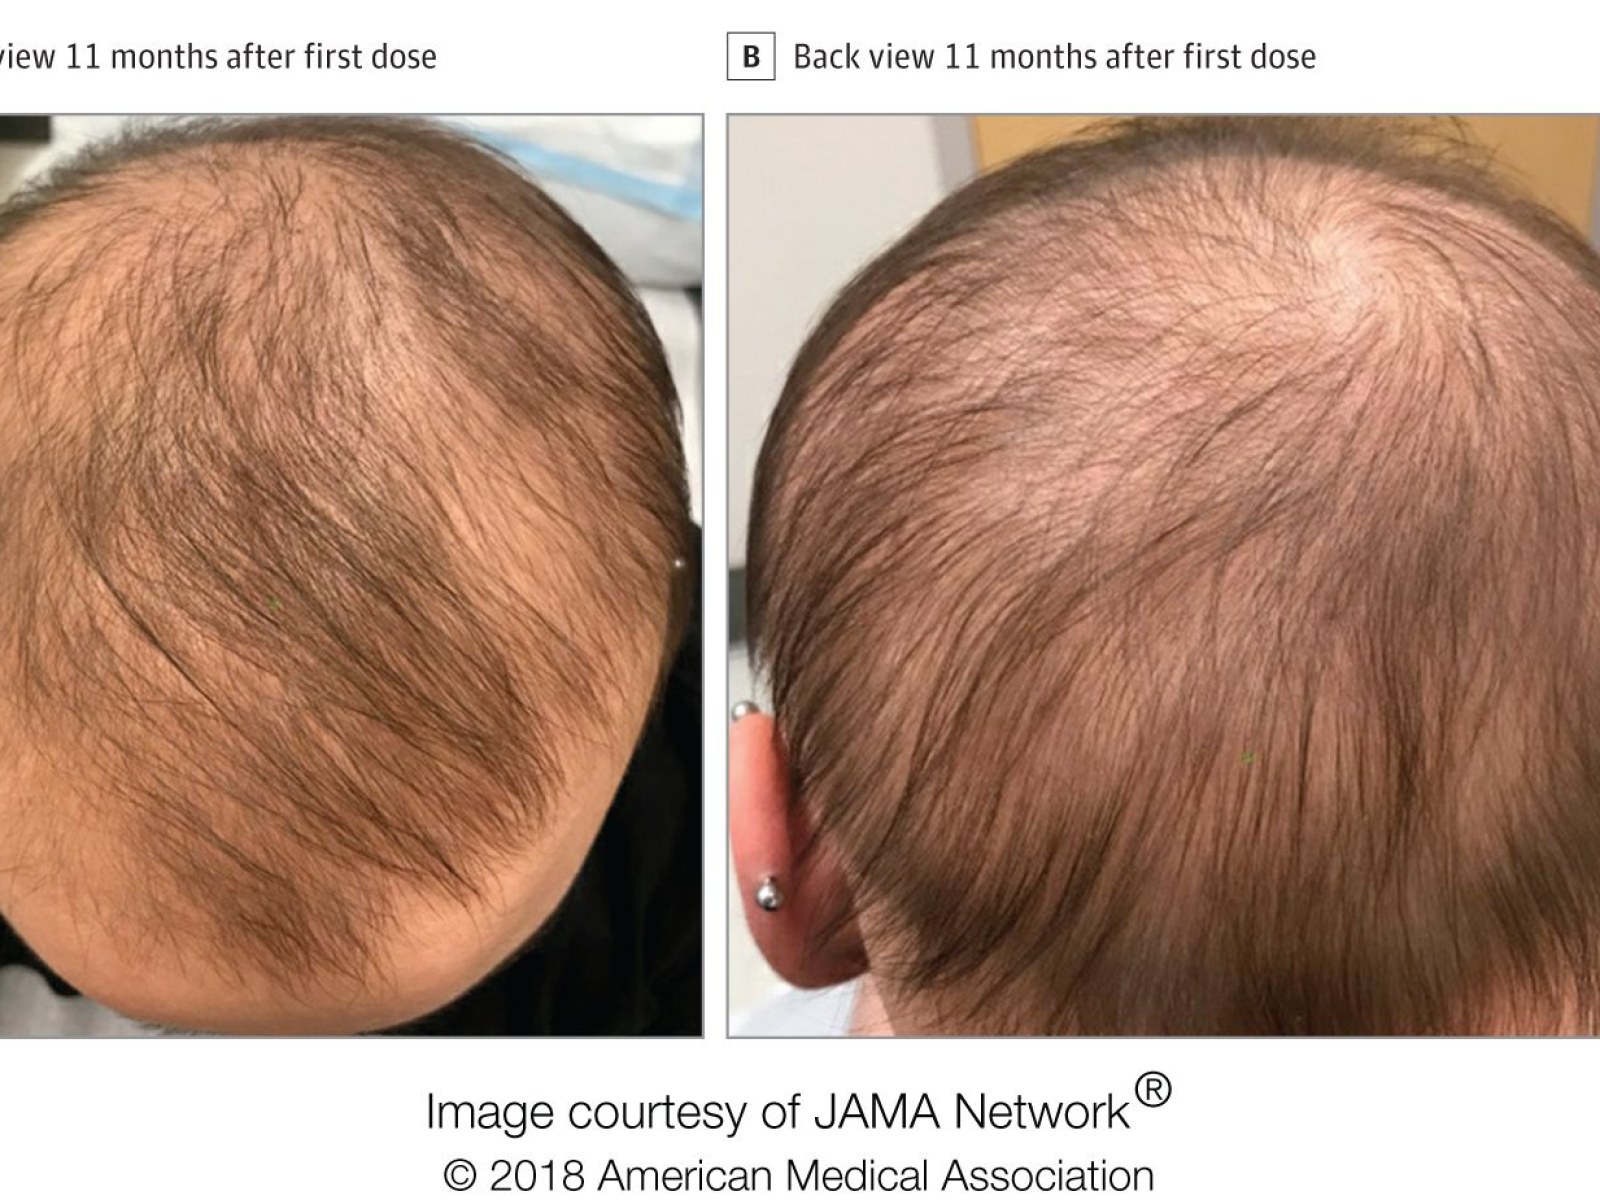 FDA-approved Eczema Drug Dupixent Causes Hair Regrowth in Alopecia Sufferer